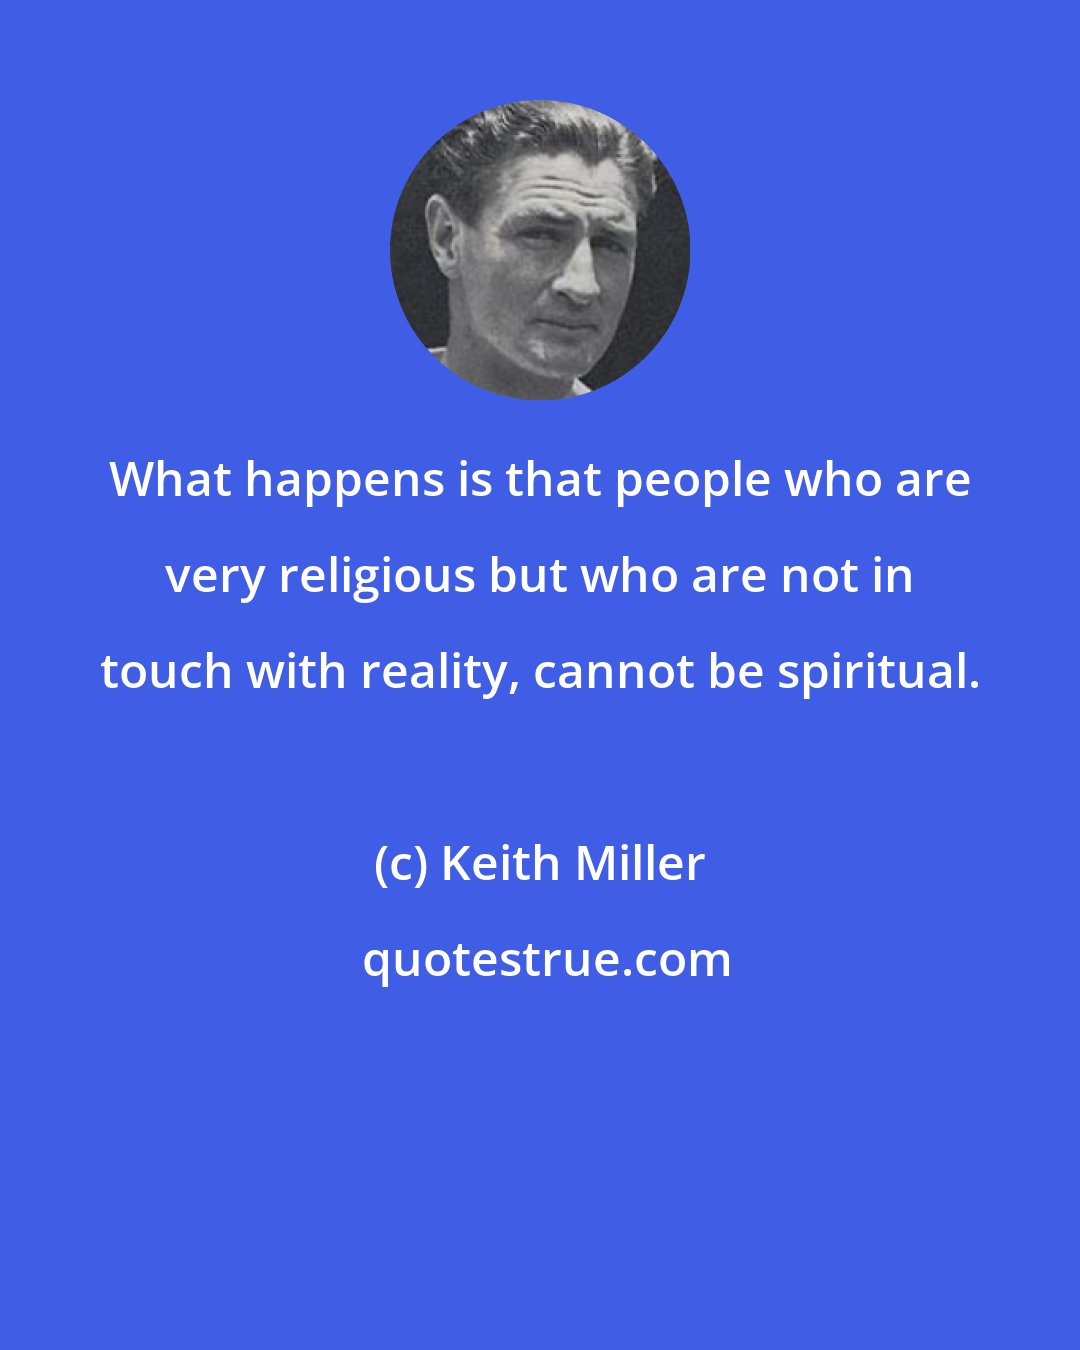 Keith Miller: What happens is that people who are very religious but who are not in touch with reality, cannot be spiritual.